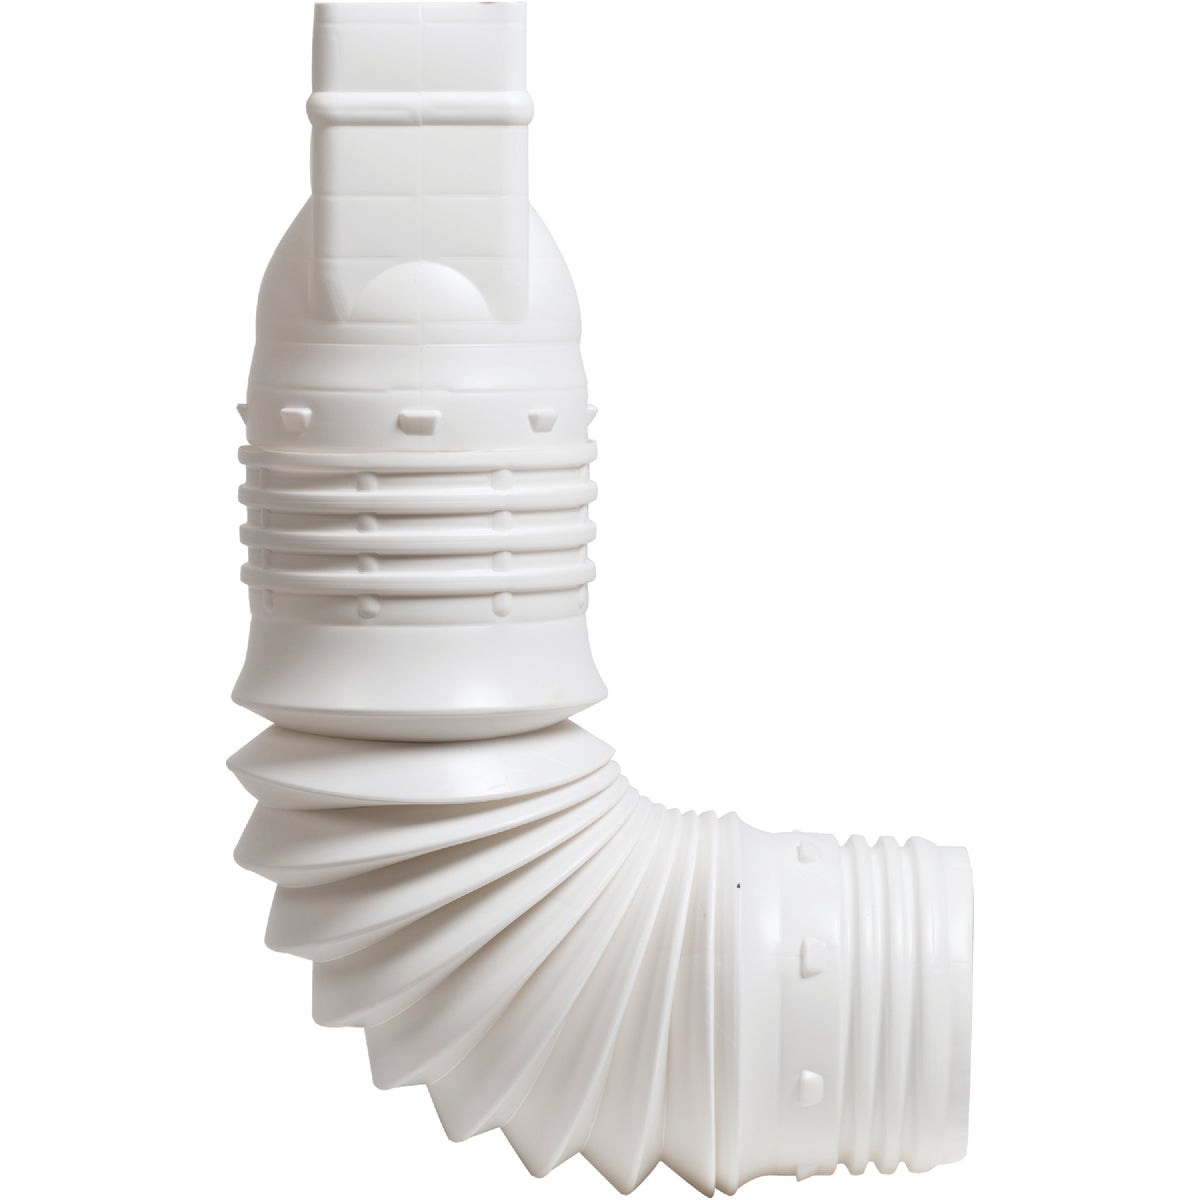 Amerimax 3X4 Wh Downspout Adapter.